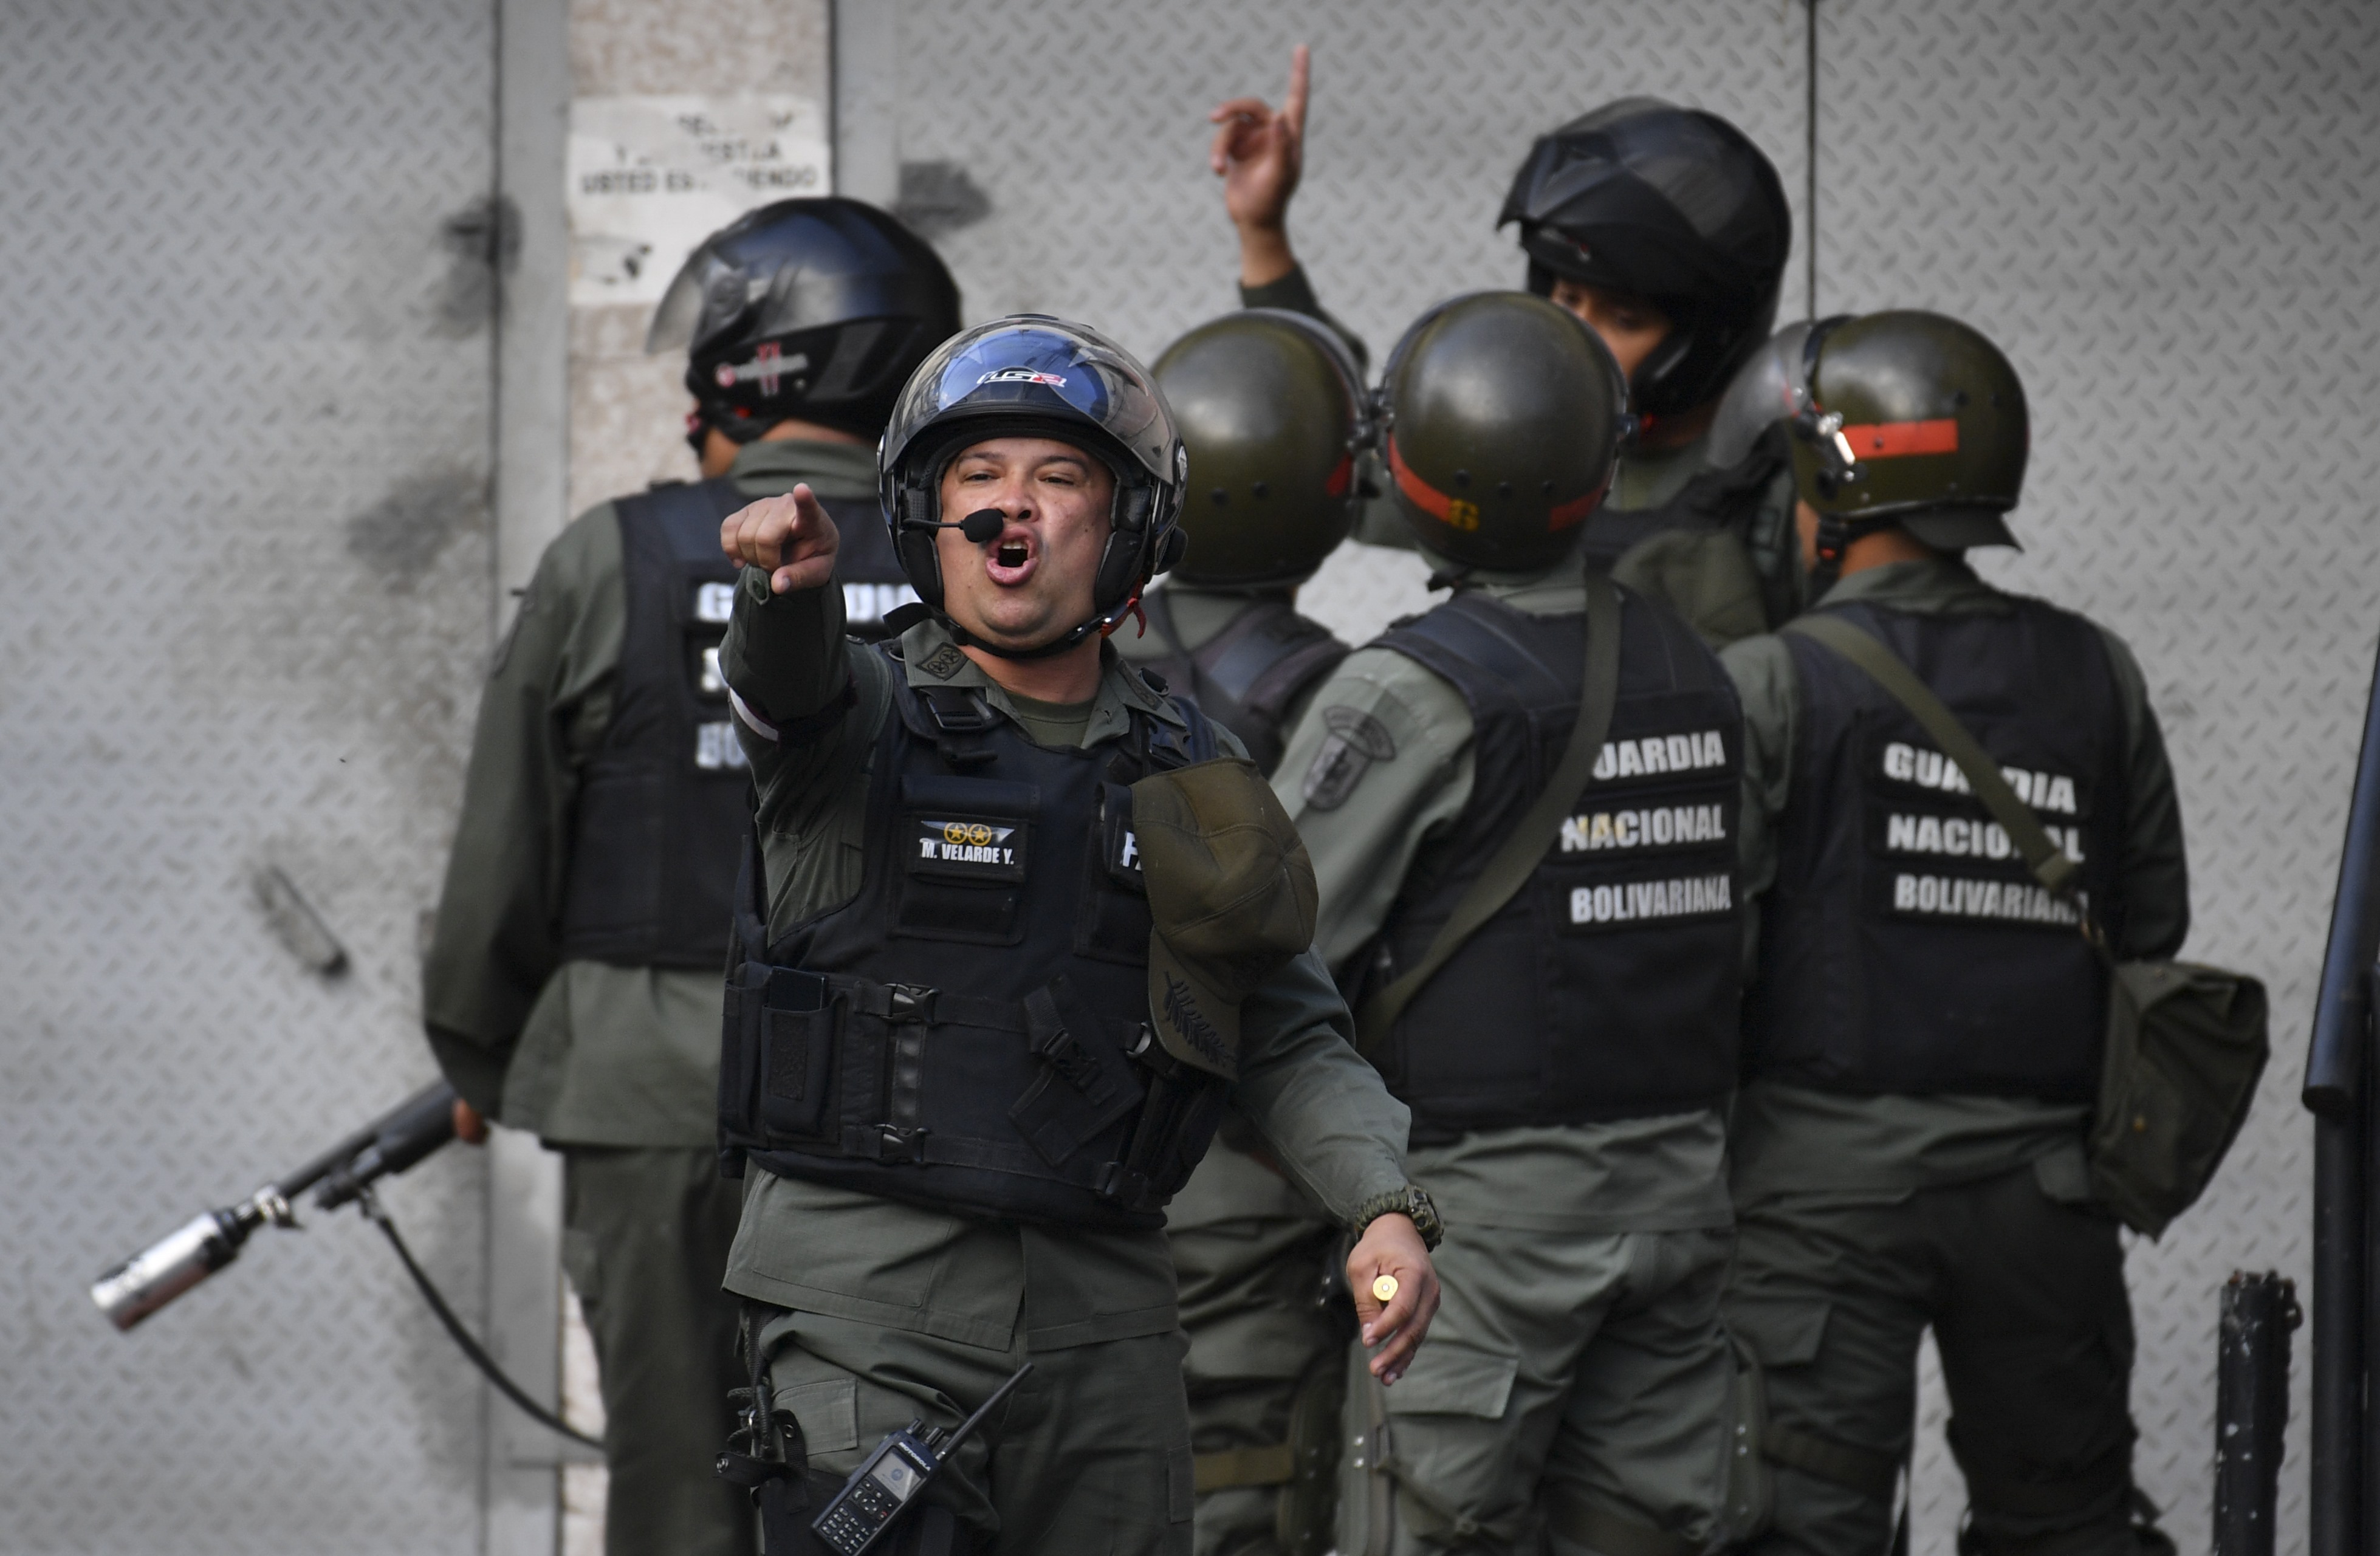 TOPSHOT - Members of the Bolivarian National Guard trough tear gas againts protesters near Cotiza Bolivarian National Guard headquarter in Caracas, Venezuela on January 21, 2019. - Venezuela military group calls in video for not recognizing Maduro (Photo by YURI CORTEZ / AFP) (Photo credit should read YURI CORTEZ/AFP/Getty Images)